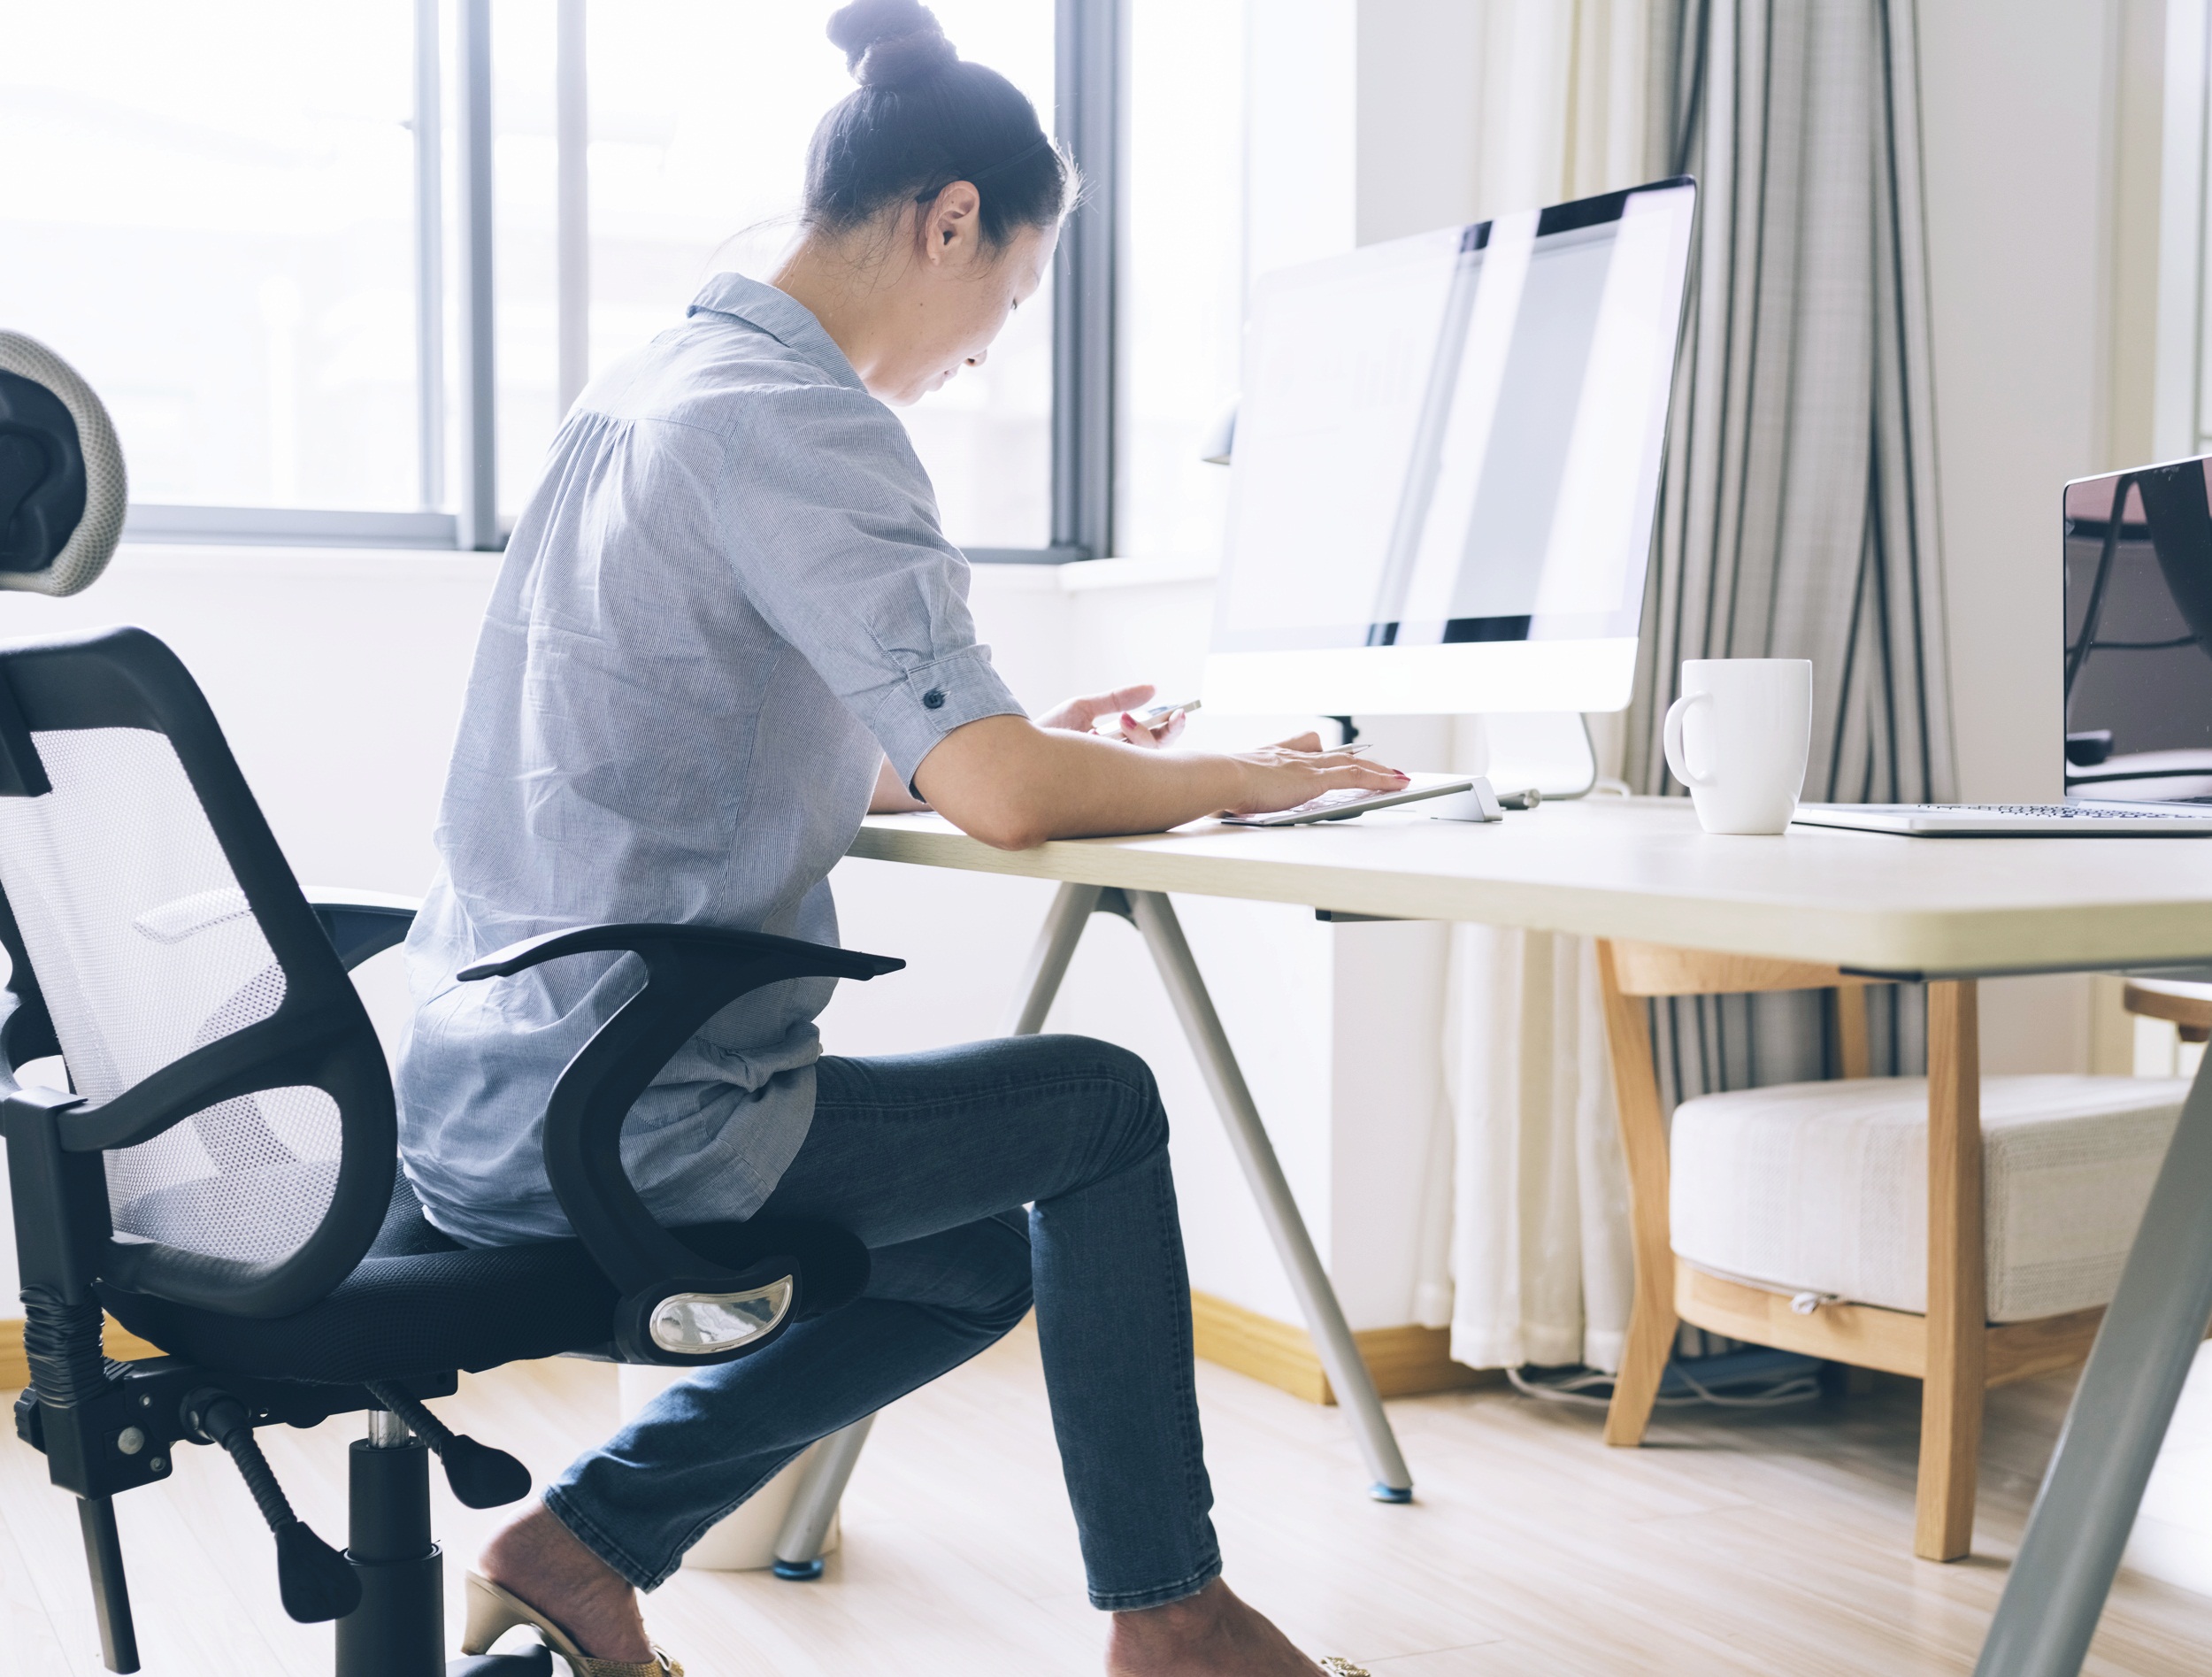 11 Best Office Chairs for a Petite Person in 2020 - Home Office HQ